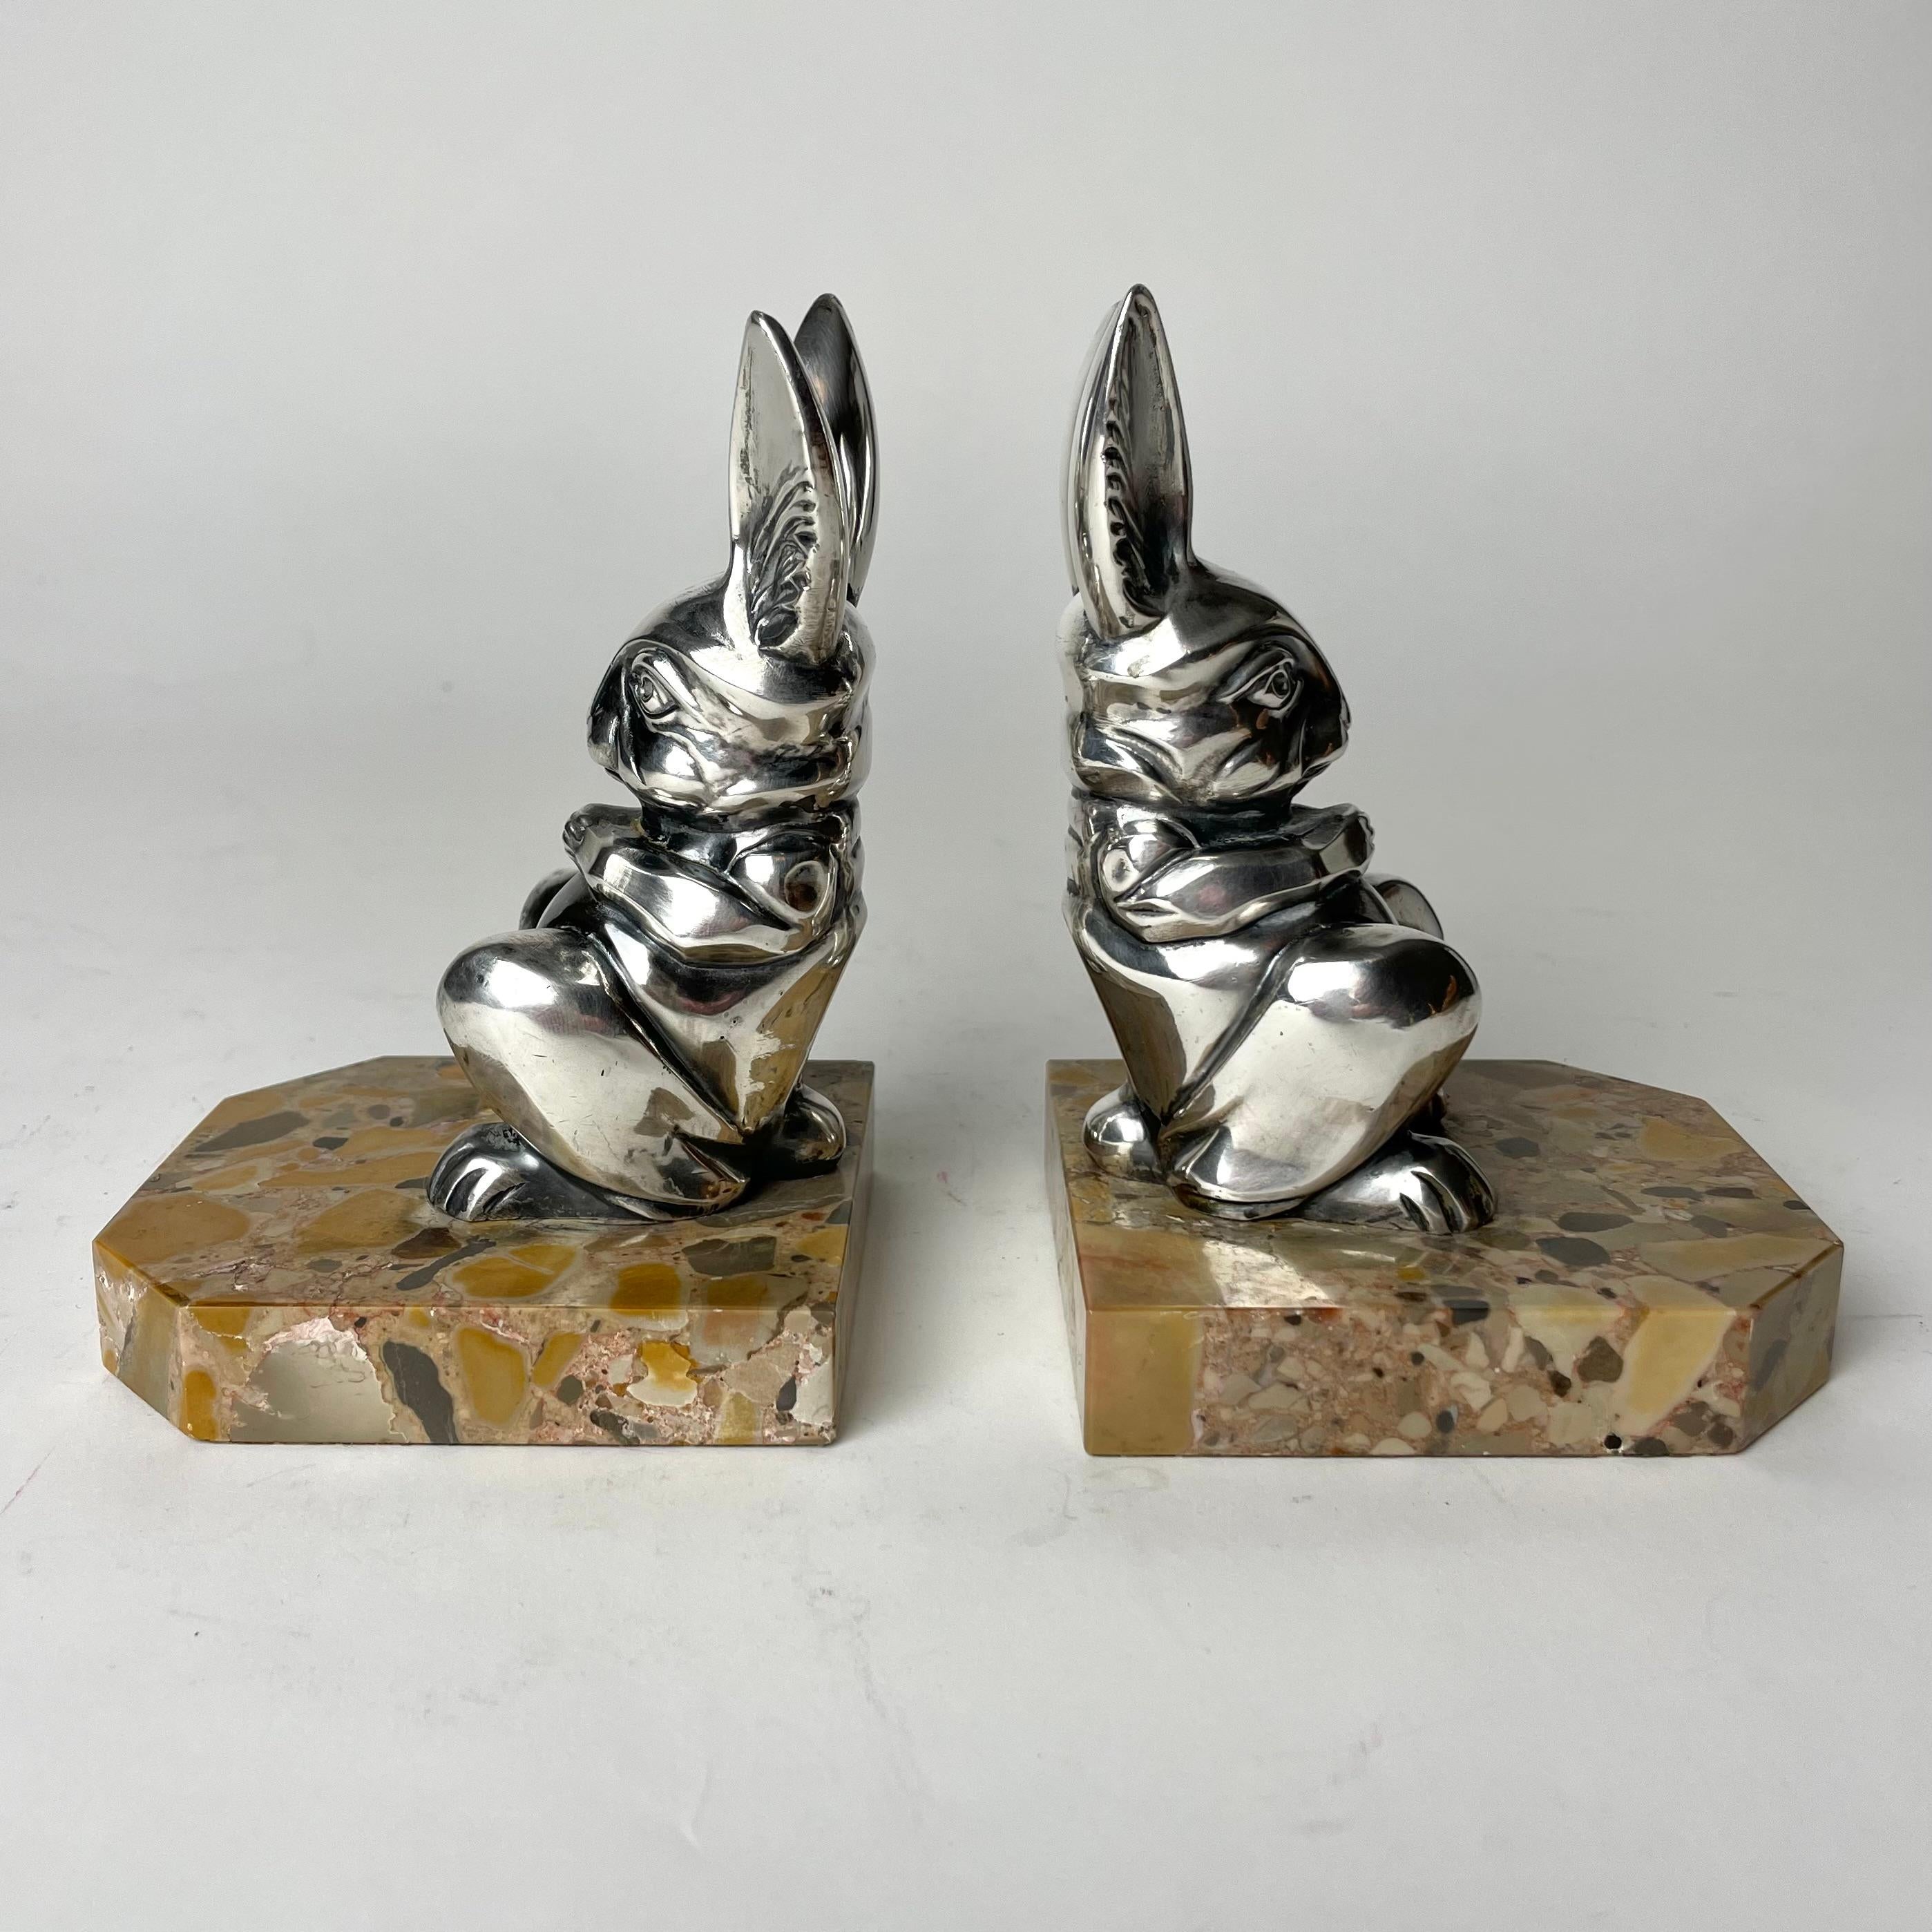 A pair of Cool Art Deco bookends from the 1920s by the French designer Hippolyte Moreau (1832-1926). Very period Art Deco design in silver-plated metal and marble.


Wear consistent with age and use 